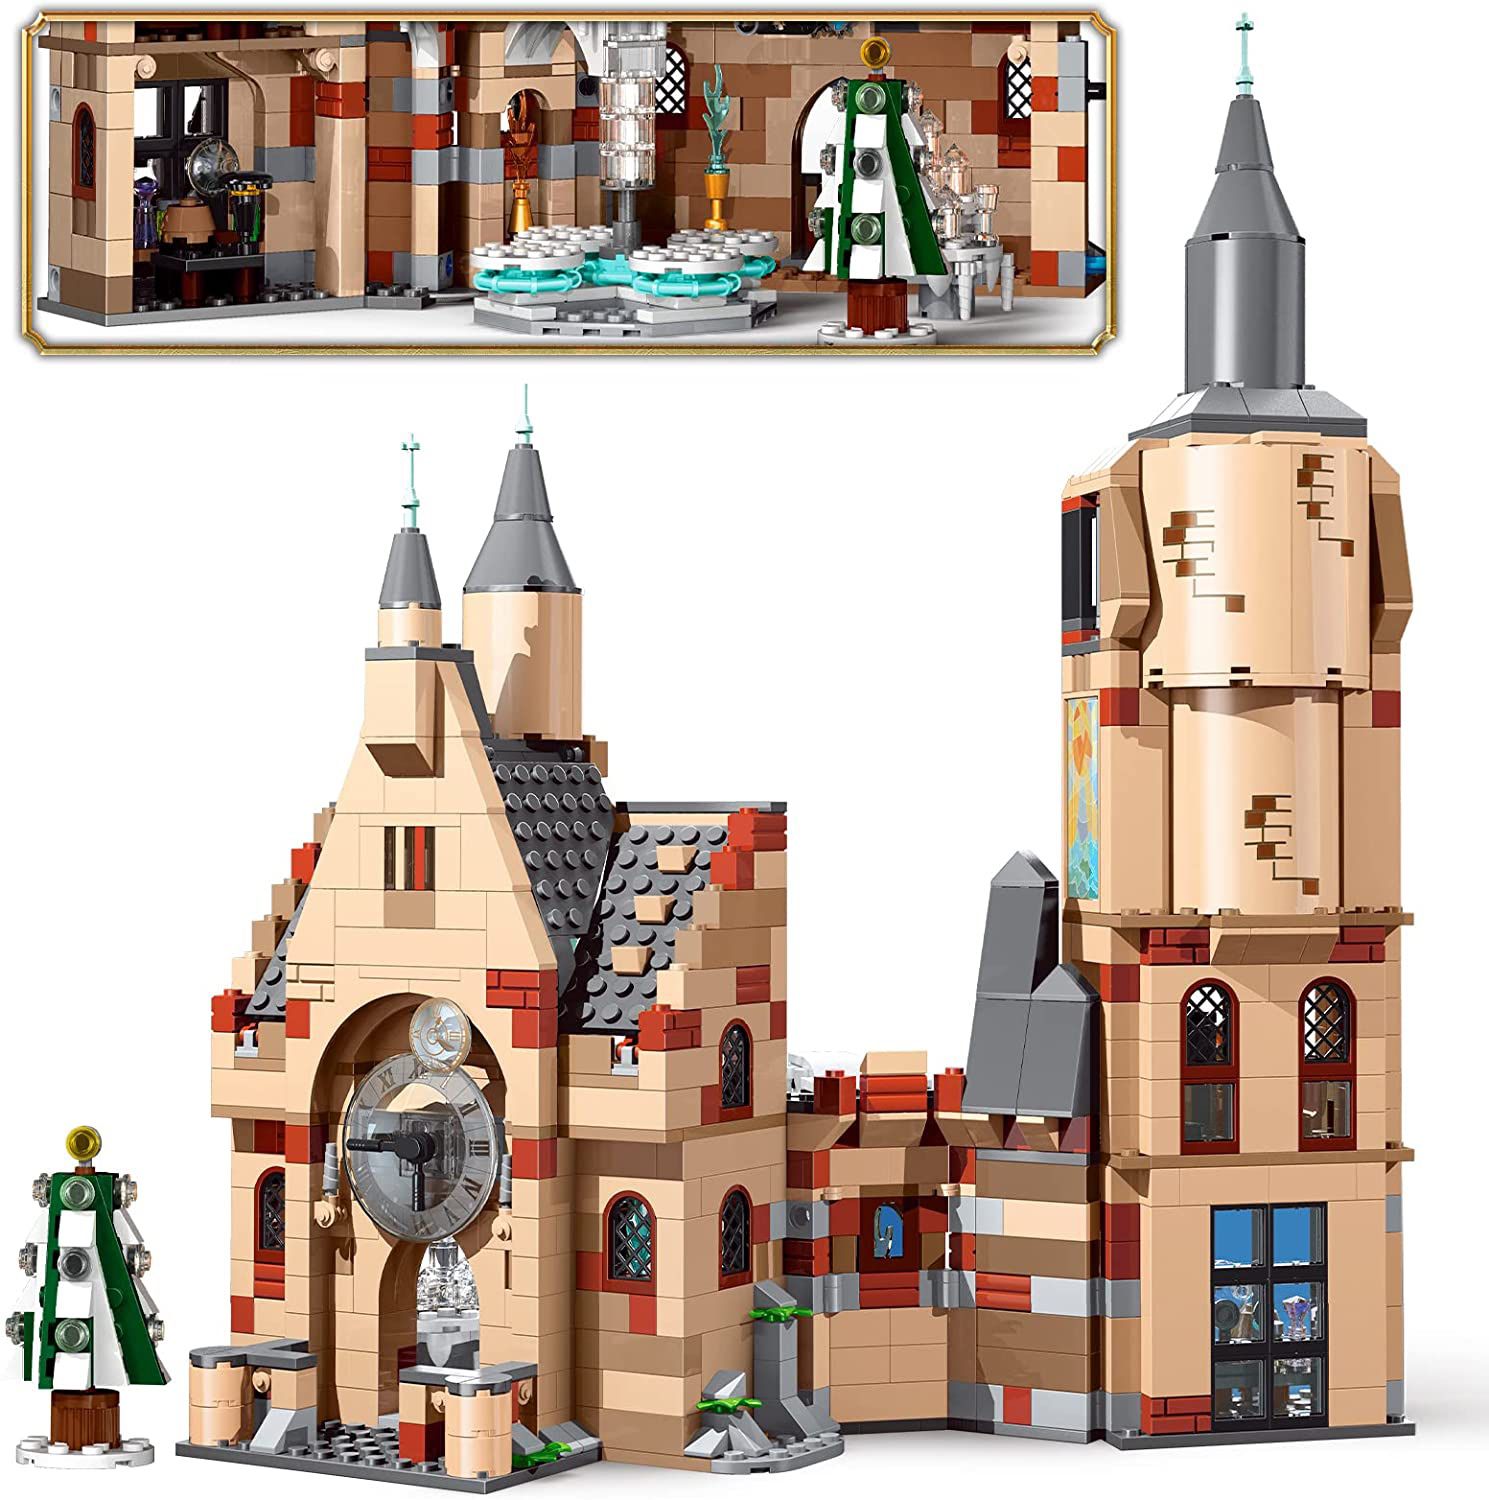 Harry Castle Potter Toys Building Sets, Clock Tower Playset for Boys & Girls  Toys Age 8-10, Best Collectible Birthday Gift Idea for Kids Aged 8 and up  for Sale in Upland, CA - OfferUp